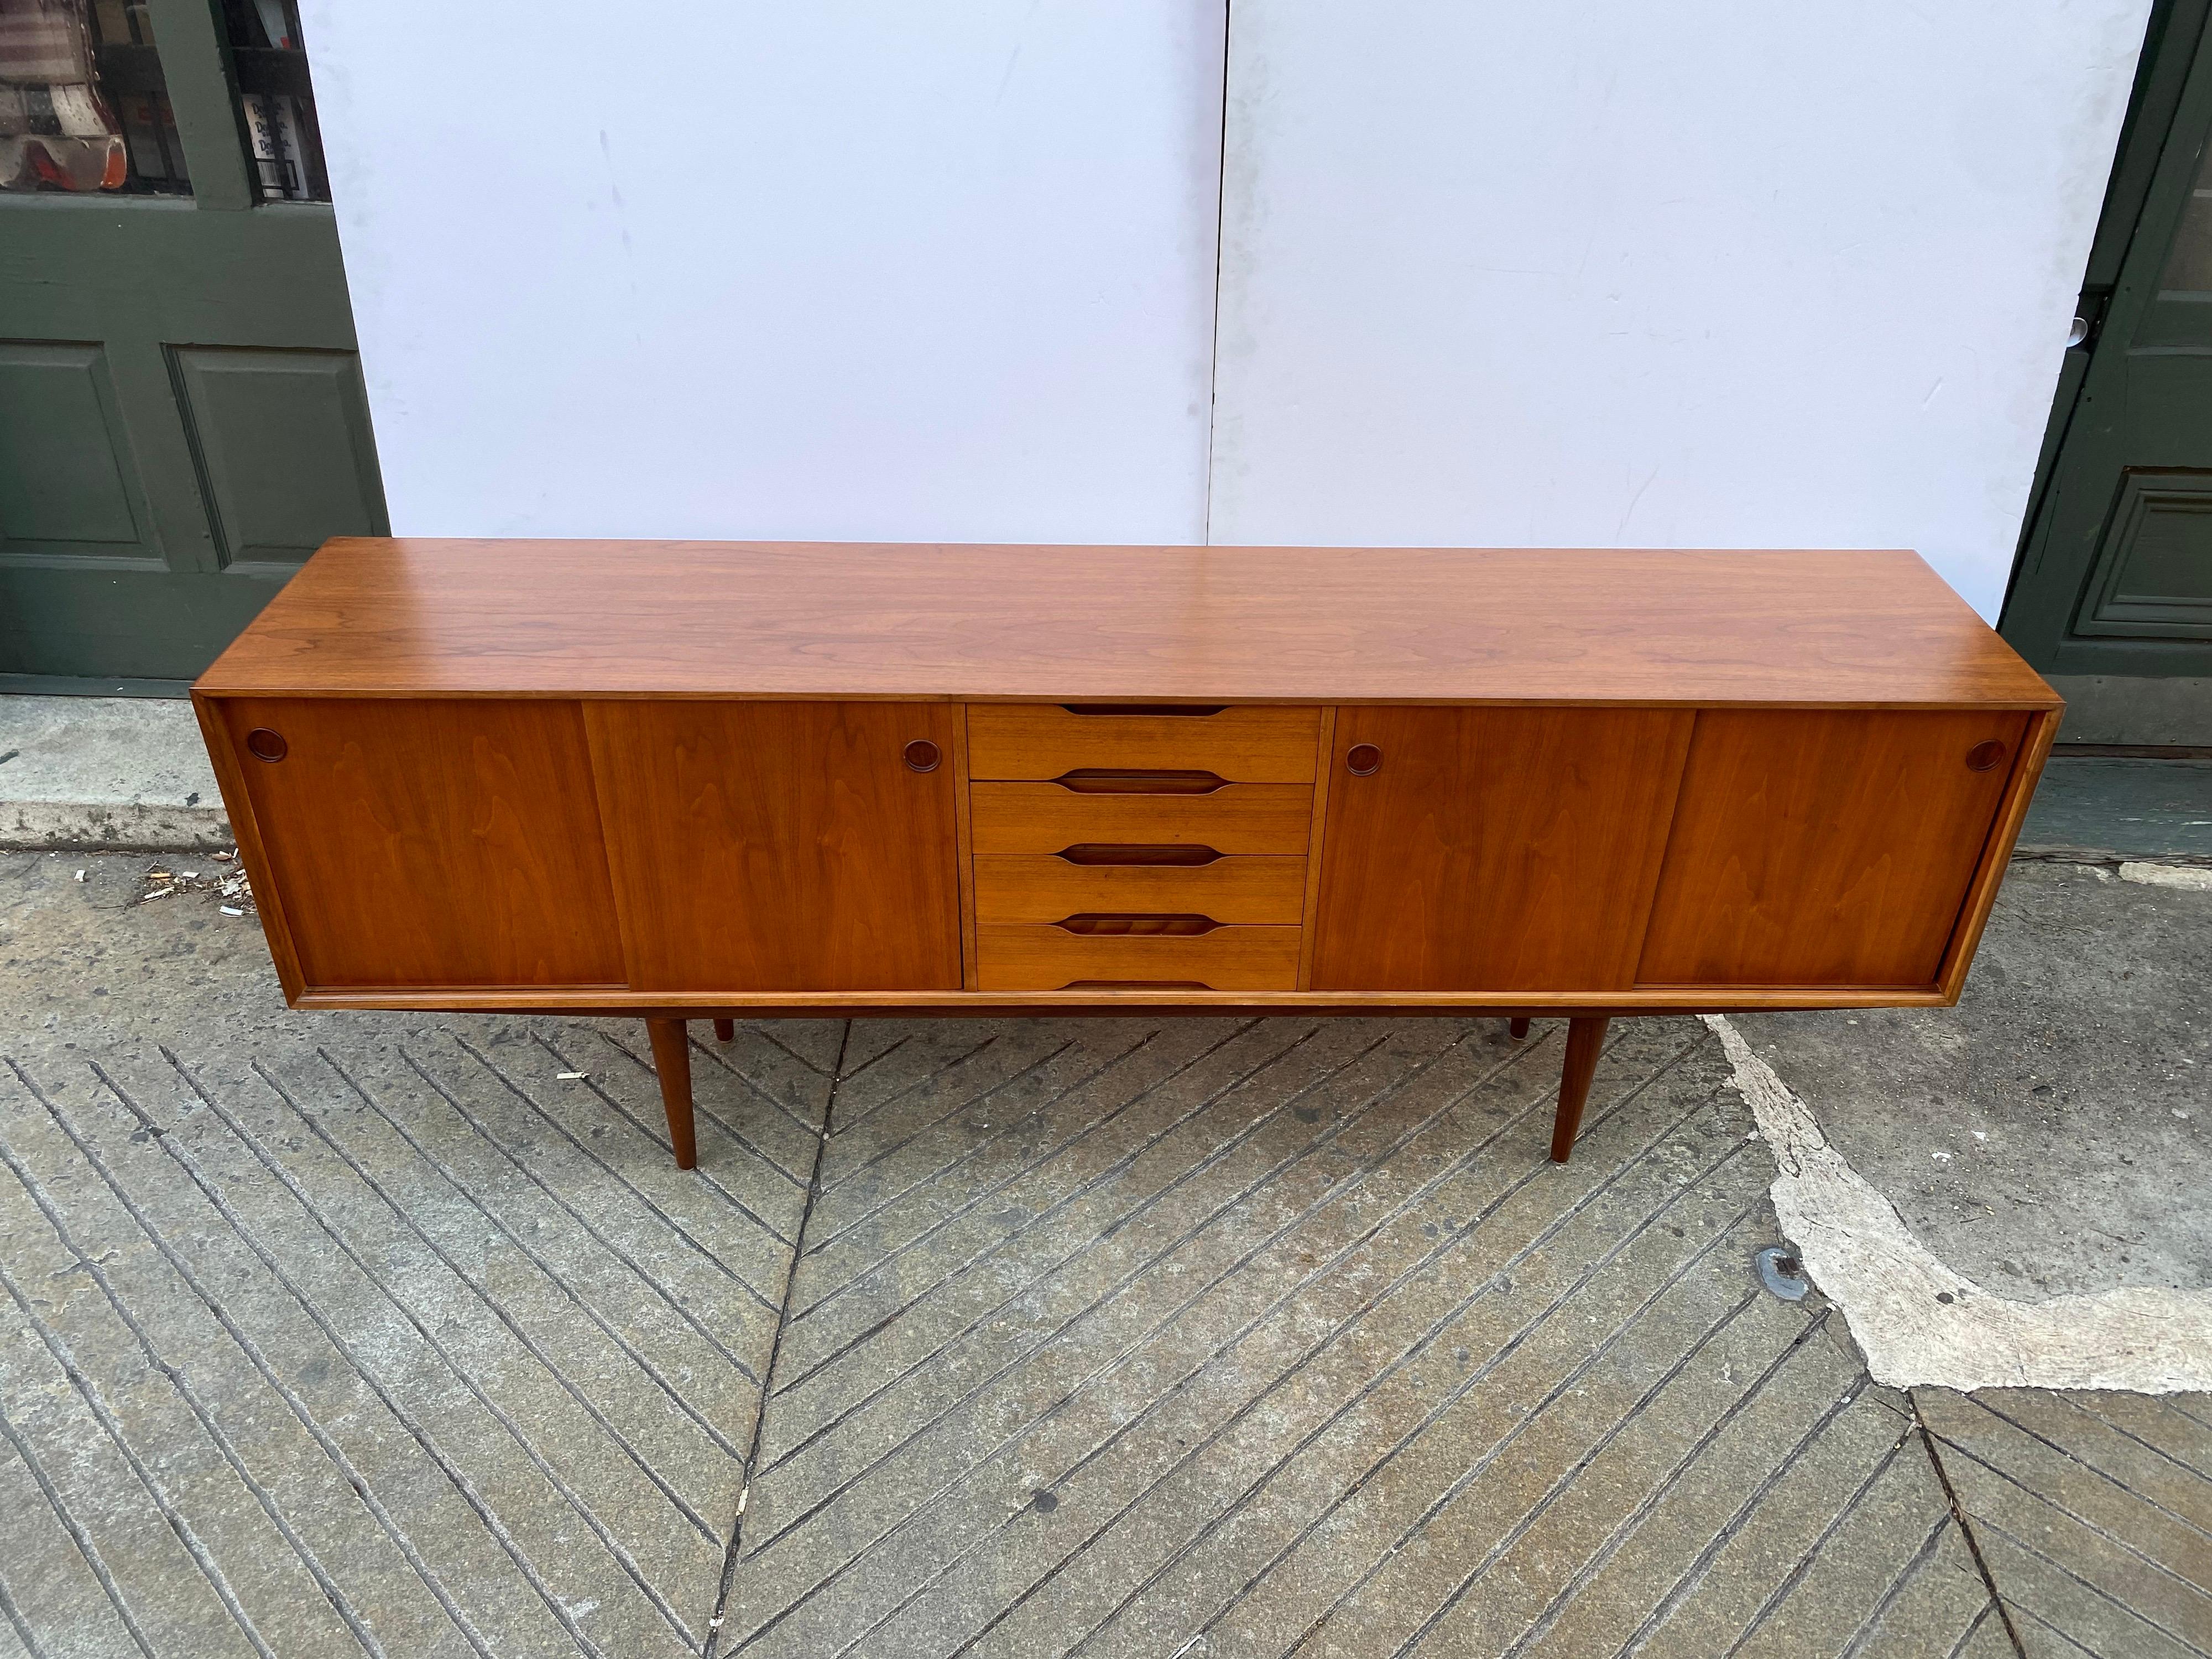 Fredrik Kayser for Gustav Bahus teak credenza. Newly refinished, beautiful grain throughout! Doors slide easily to reveal an adjustable shelf on the right side and open space on the left. Center is 4 pull out drawers with felt bottoms. Legs do